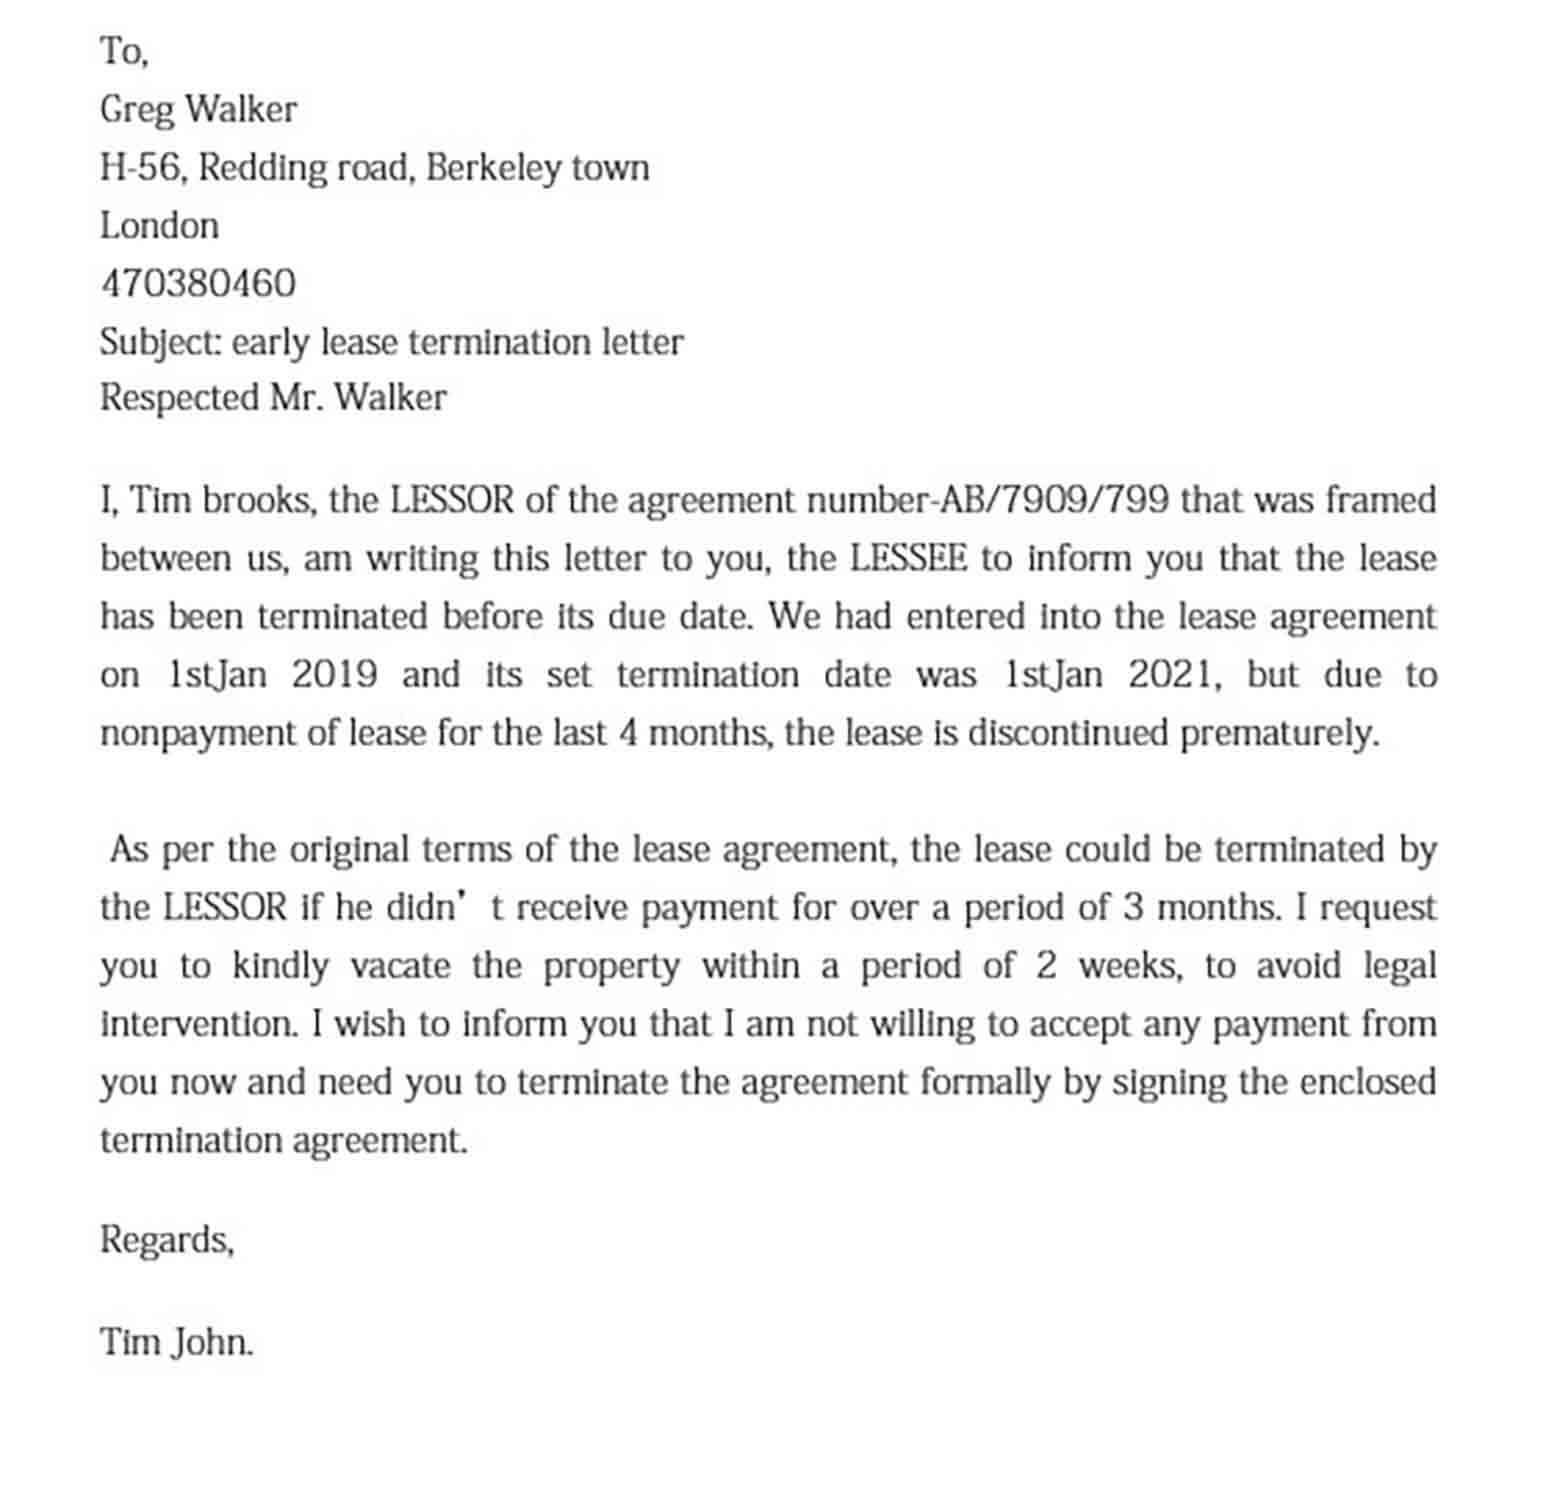 Sample Of Early Lease Termination Letter